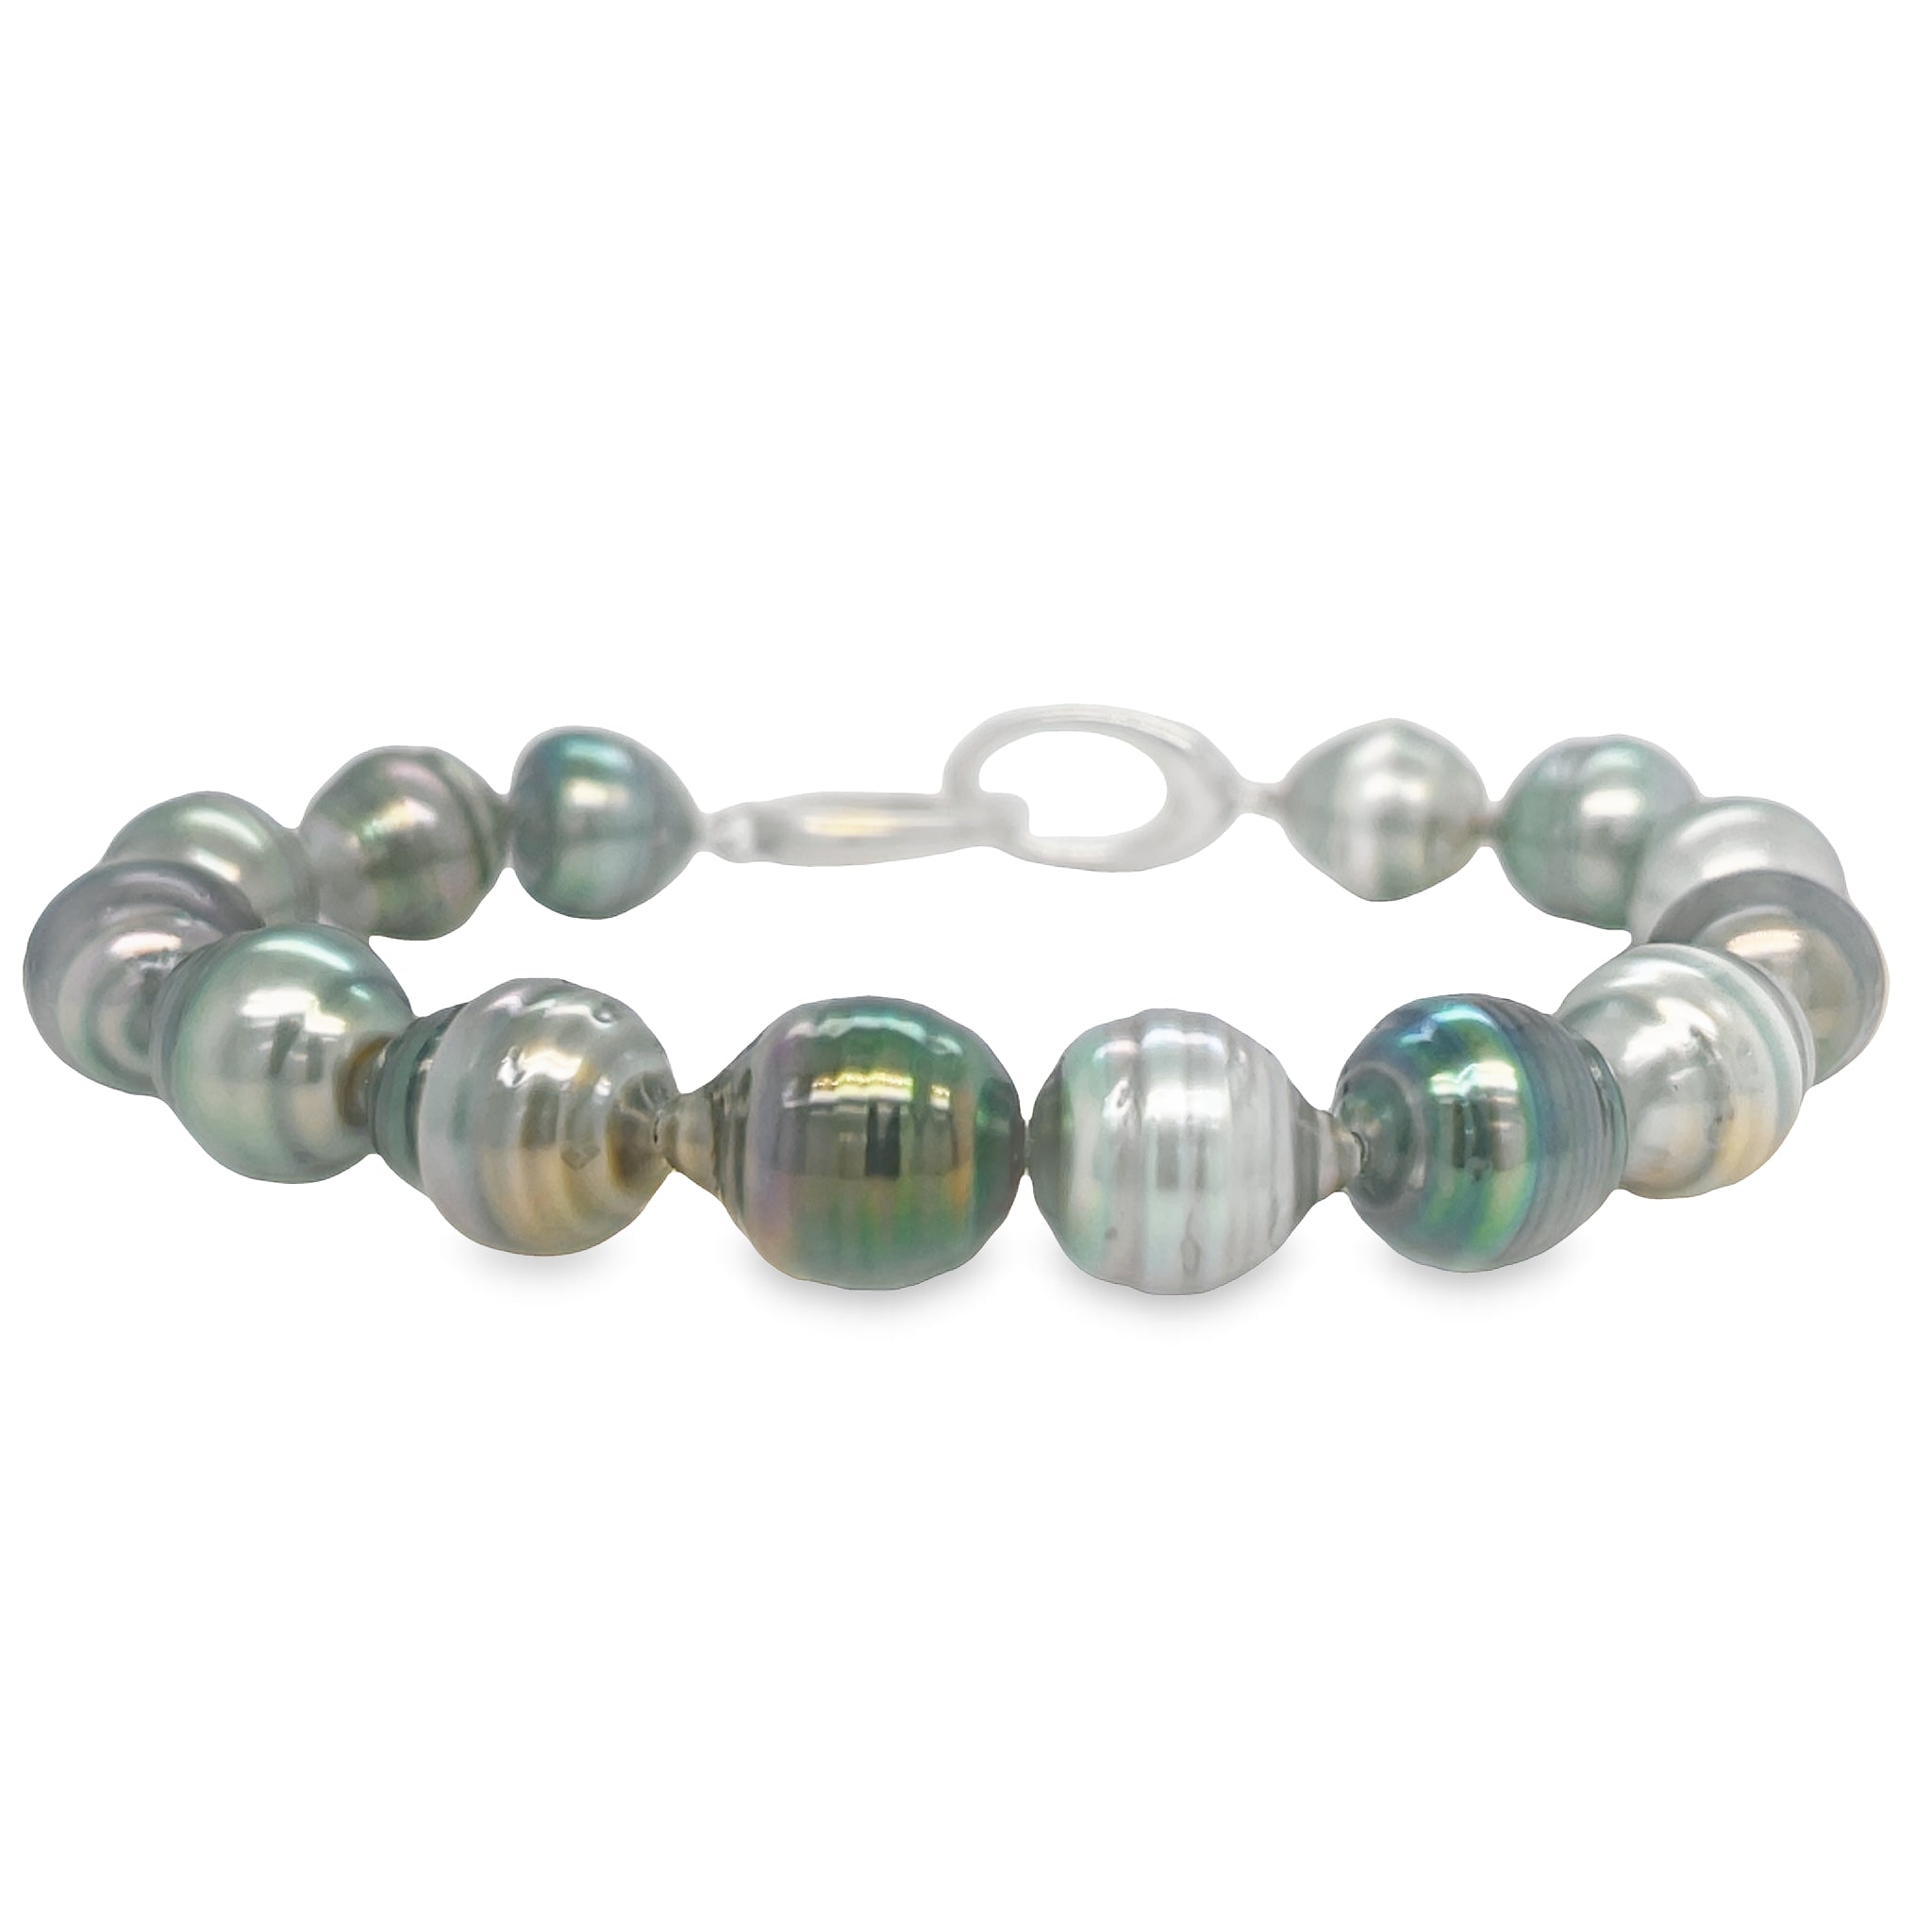 This stunning Tahitian Baroque Pearl Bracelet features 9.50 mm pearls with great luster and a variety of colors. Secured with 14k white gold triggerless clasp for easy grip, this bracelet is a timeless beauty.